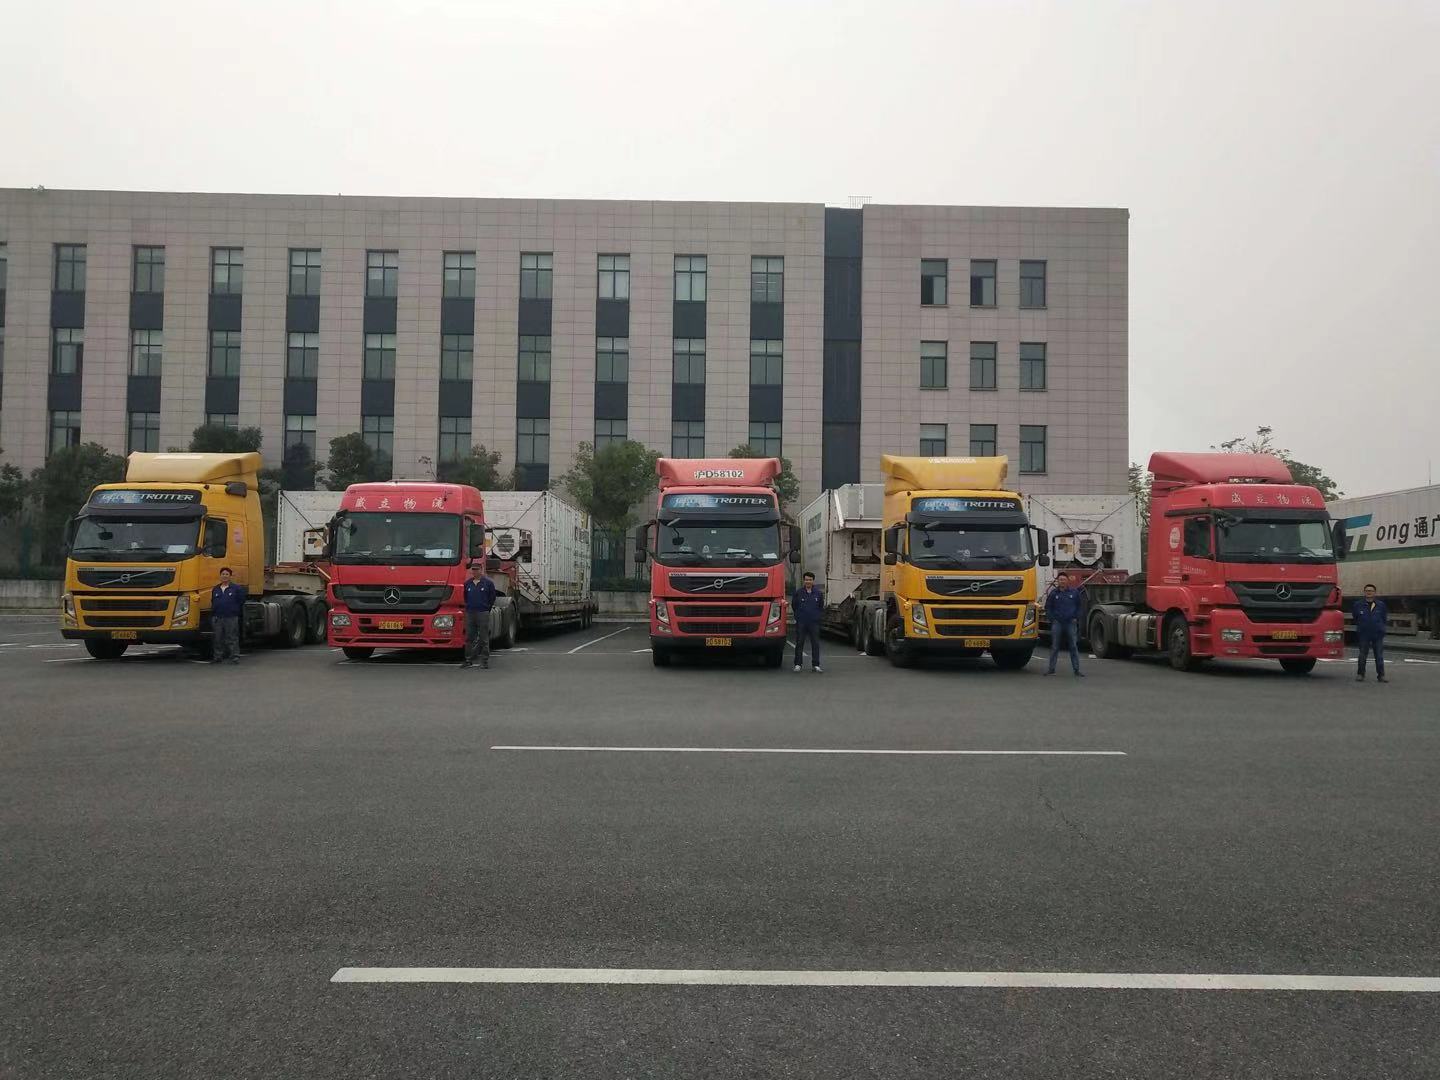 Our company transported lithography machine and precision semiconductor equipments at over 100 million RMB in cost to the destination safely and smoothly.